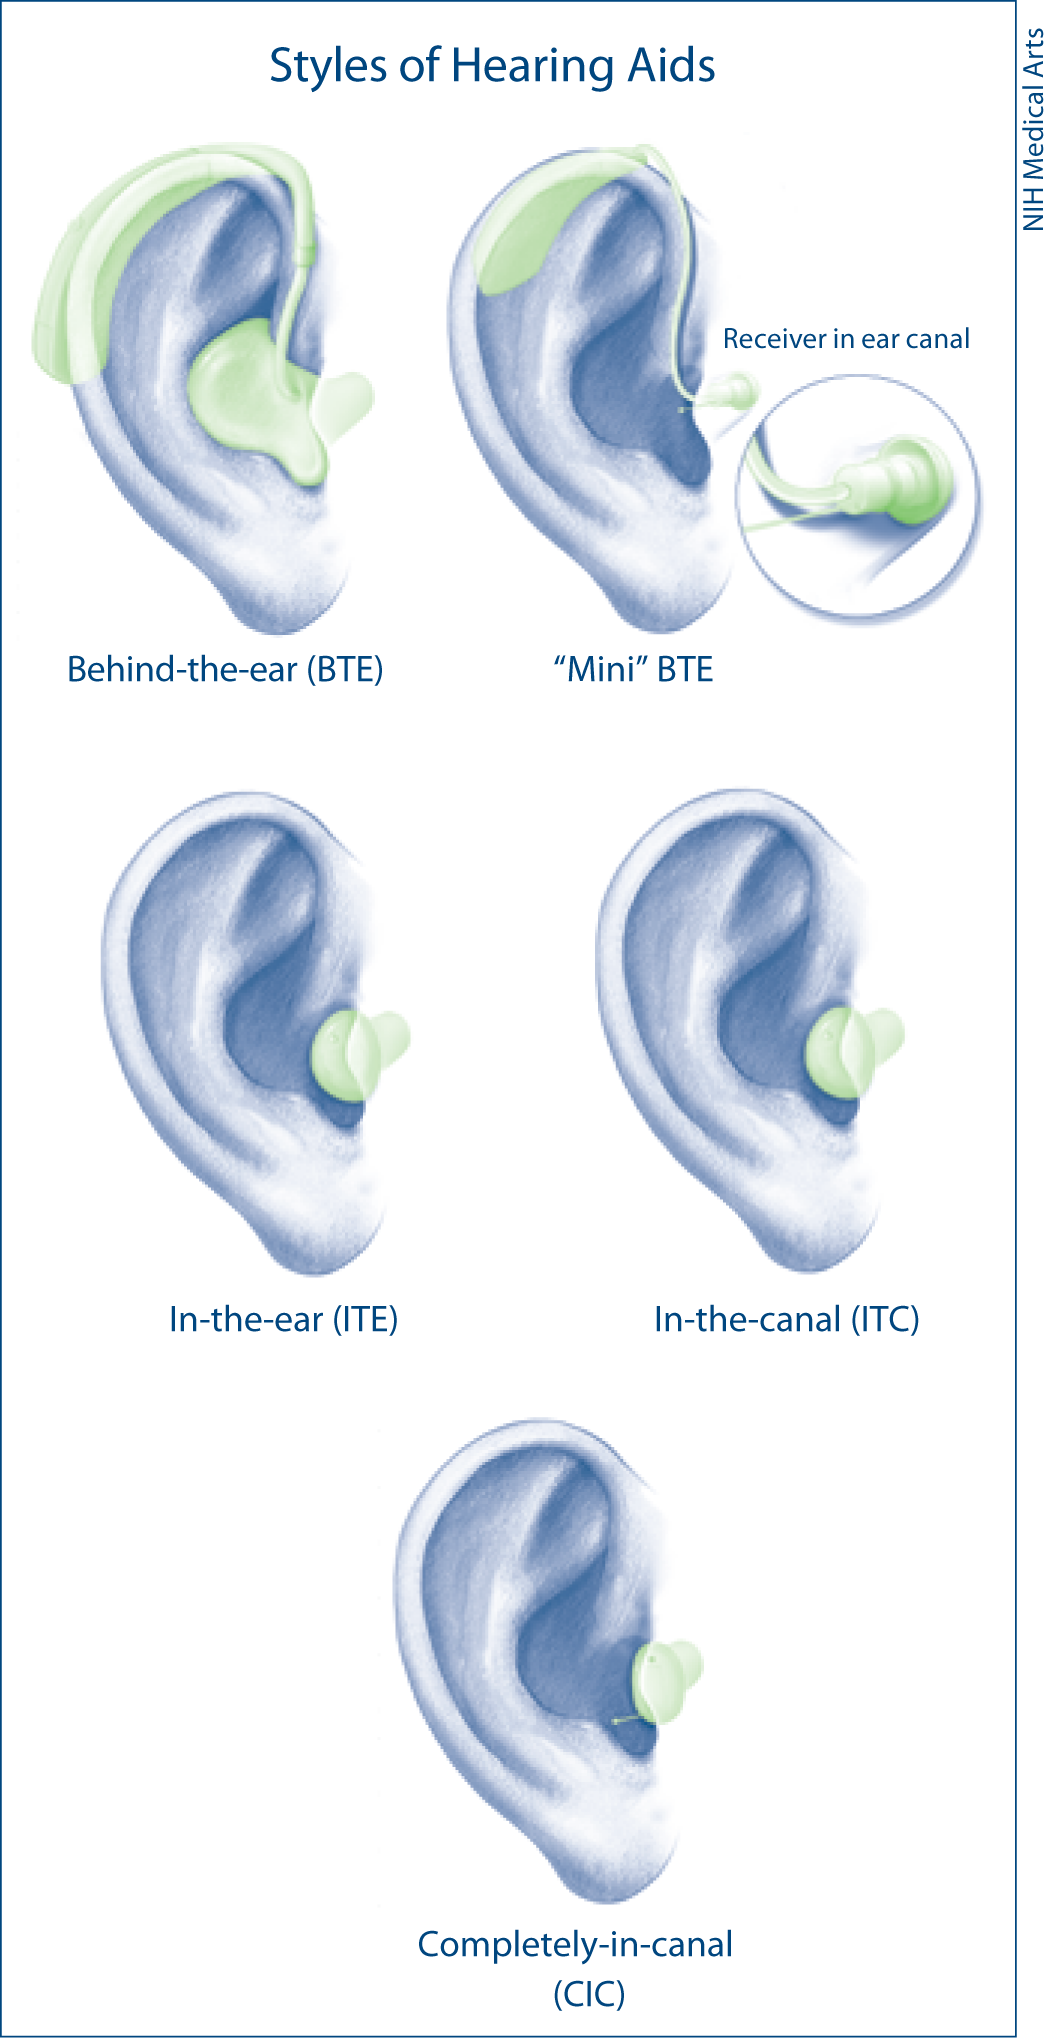 Figure showing different types of hearing aid.